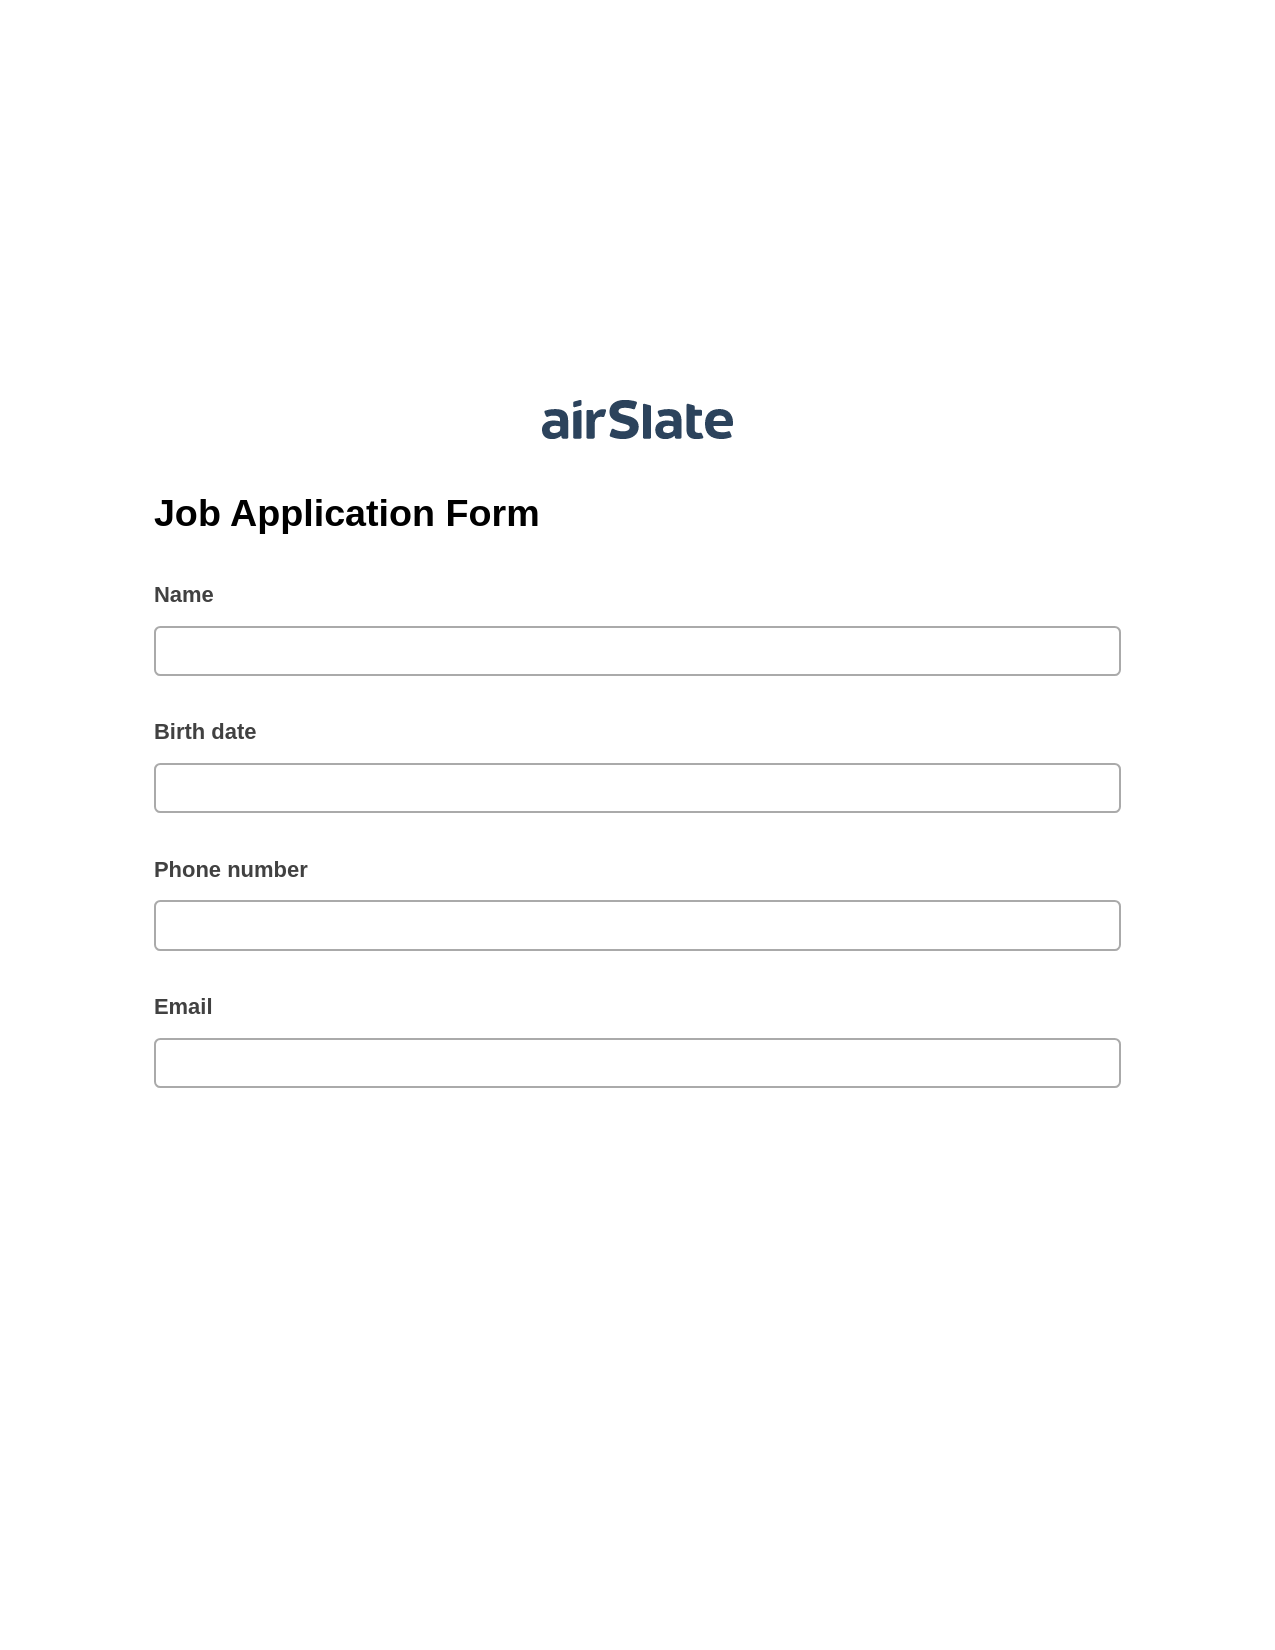 Job Application Form Pre-fill from Excel Spreadsheet Bot, System Bot - Create a Slate in another Flow, Export to Formstack Documents Bot